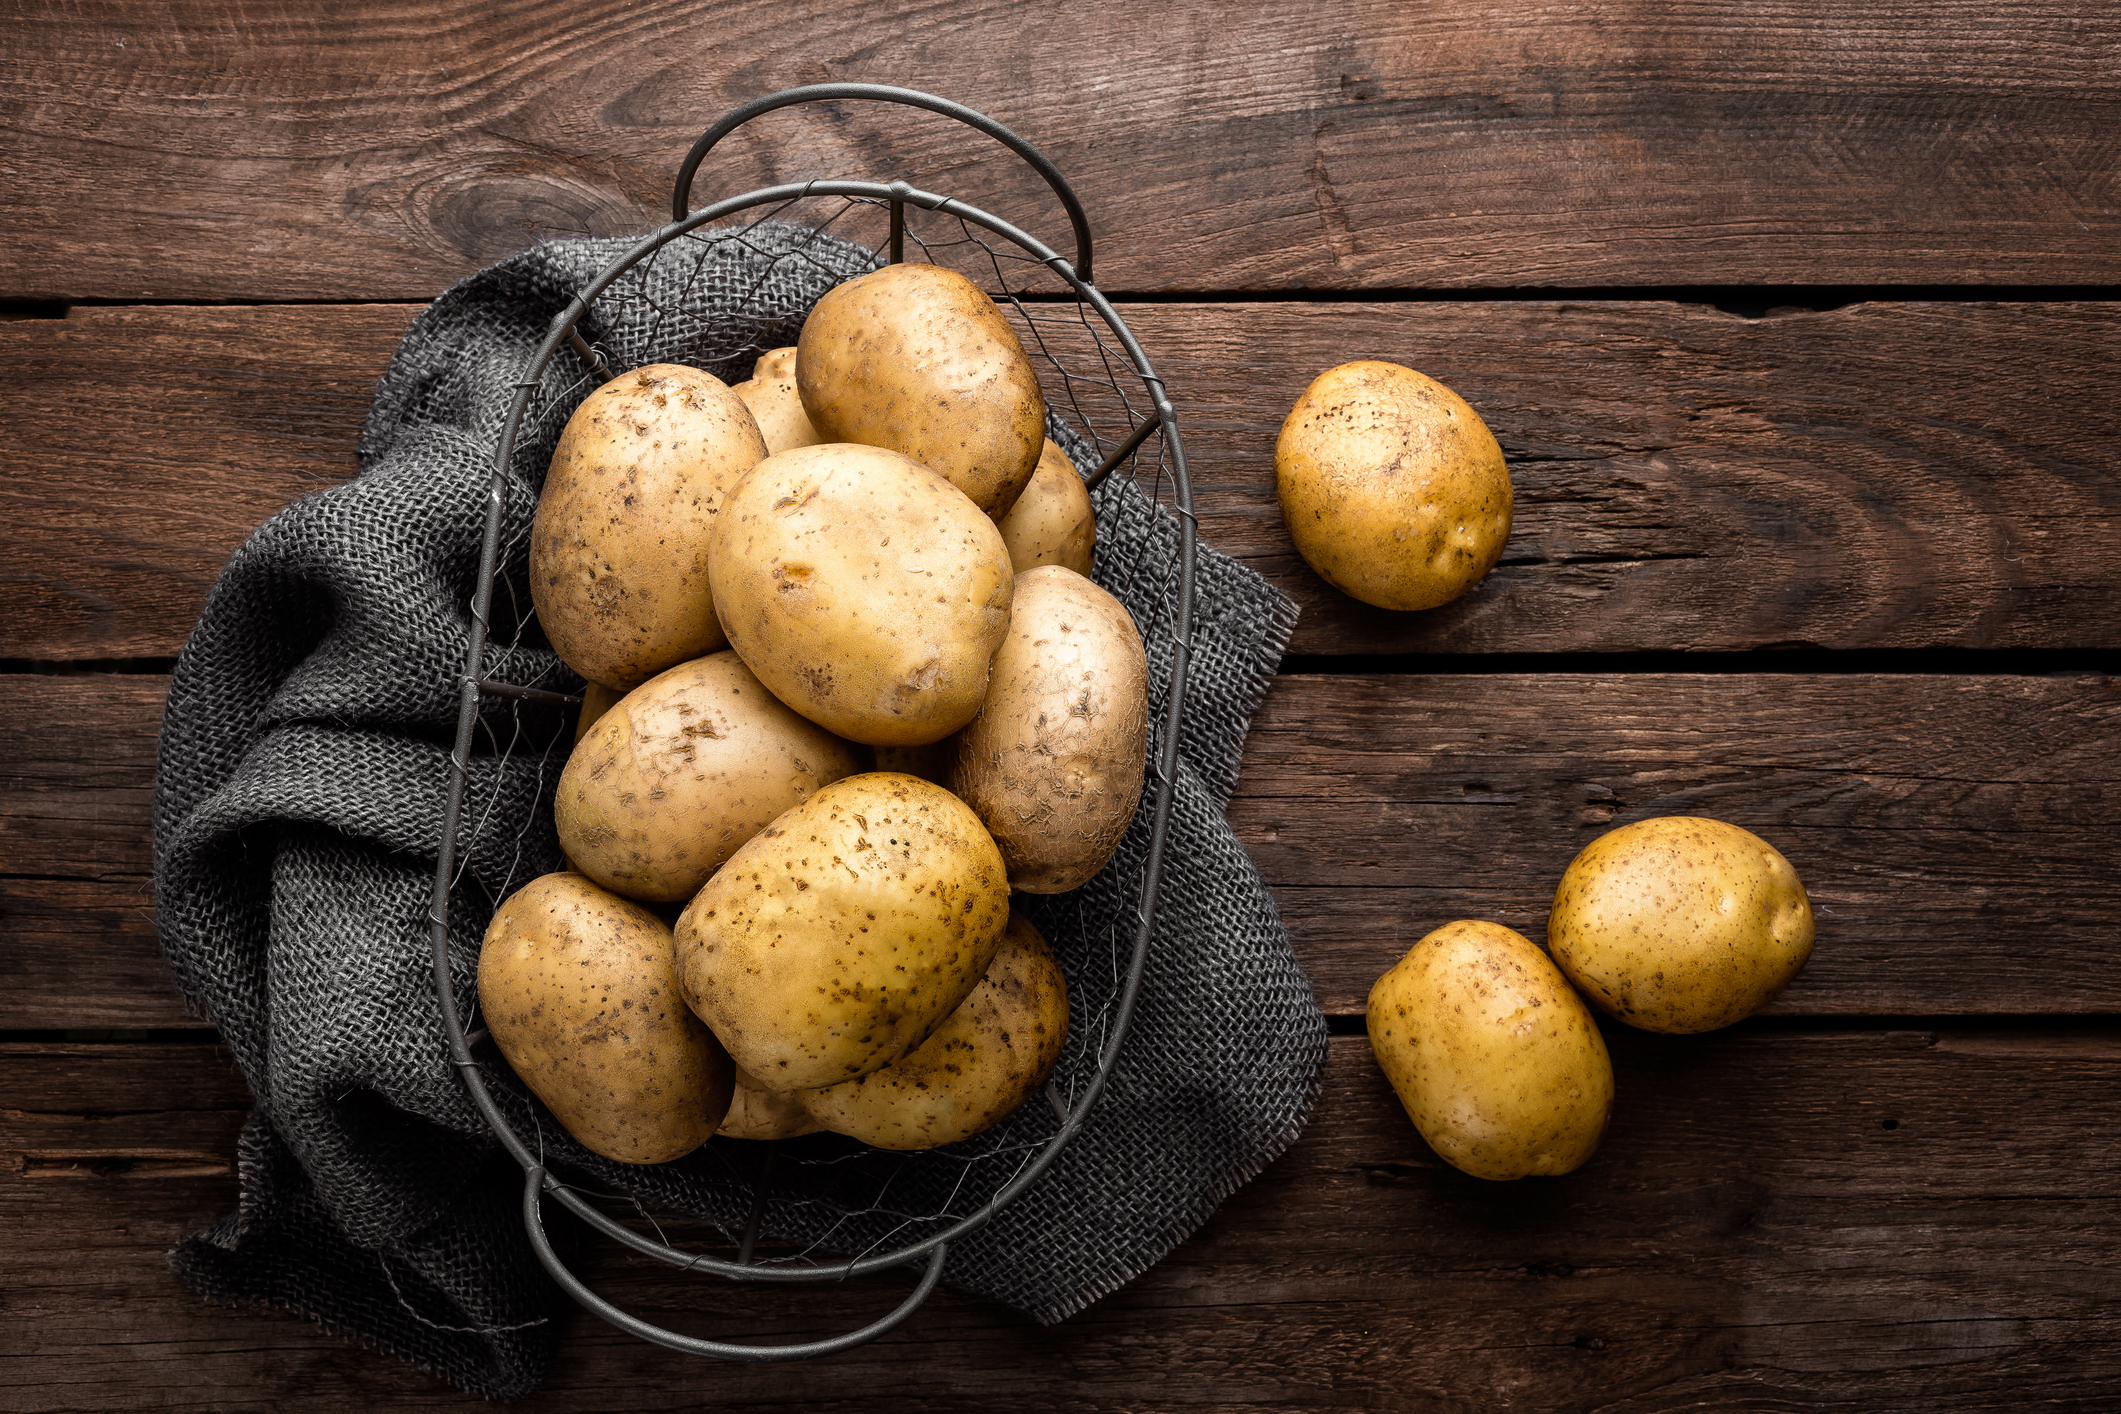 is an all potato diet healthy